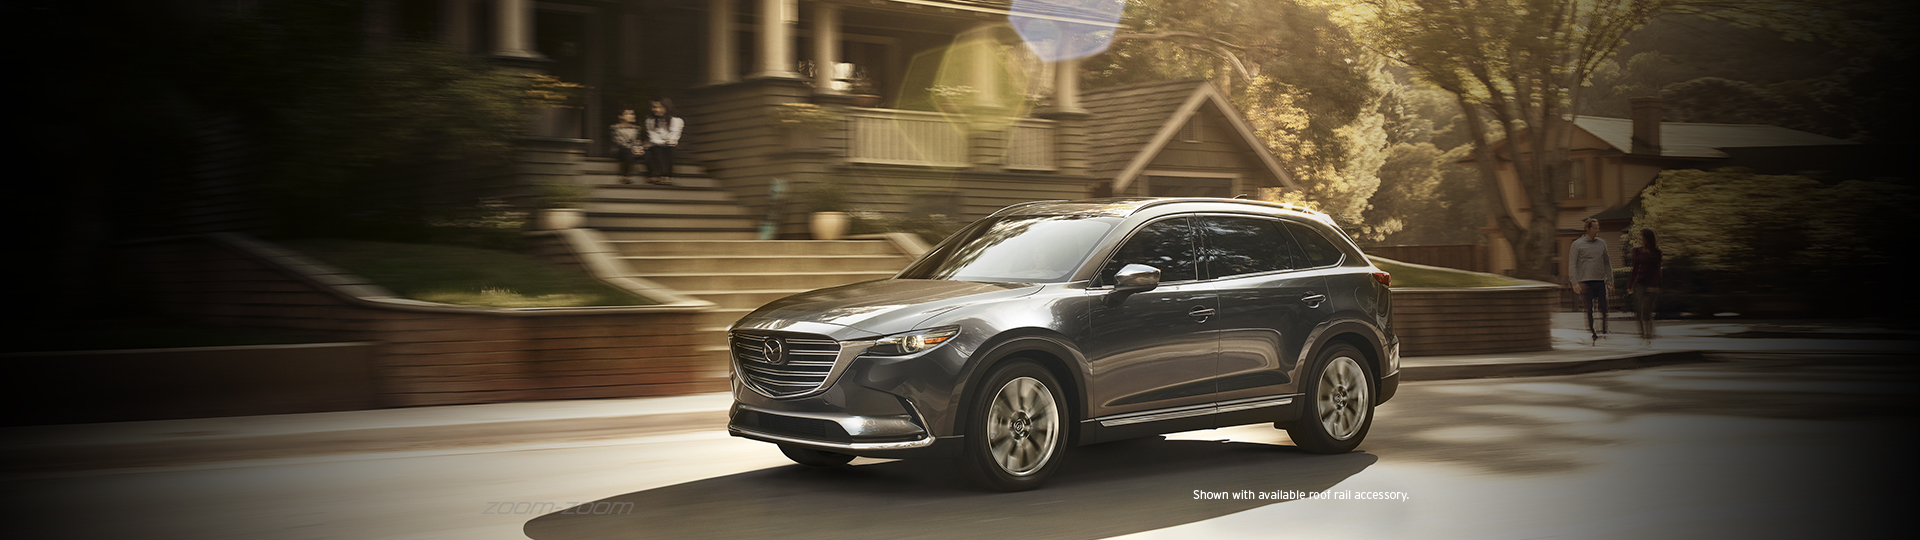 2016 Mazda CX-9 GT Exterior Side View